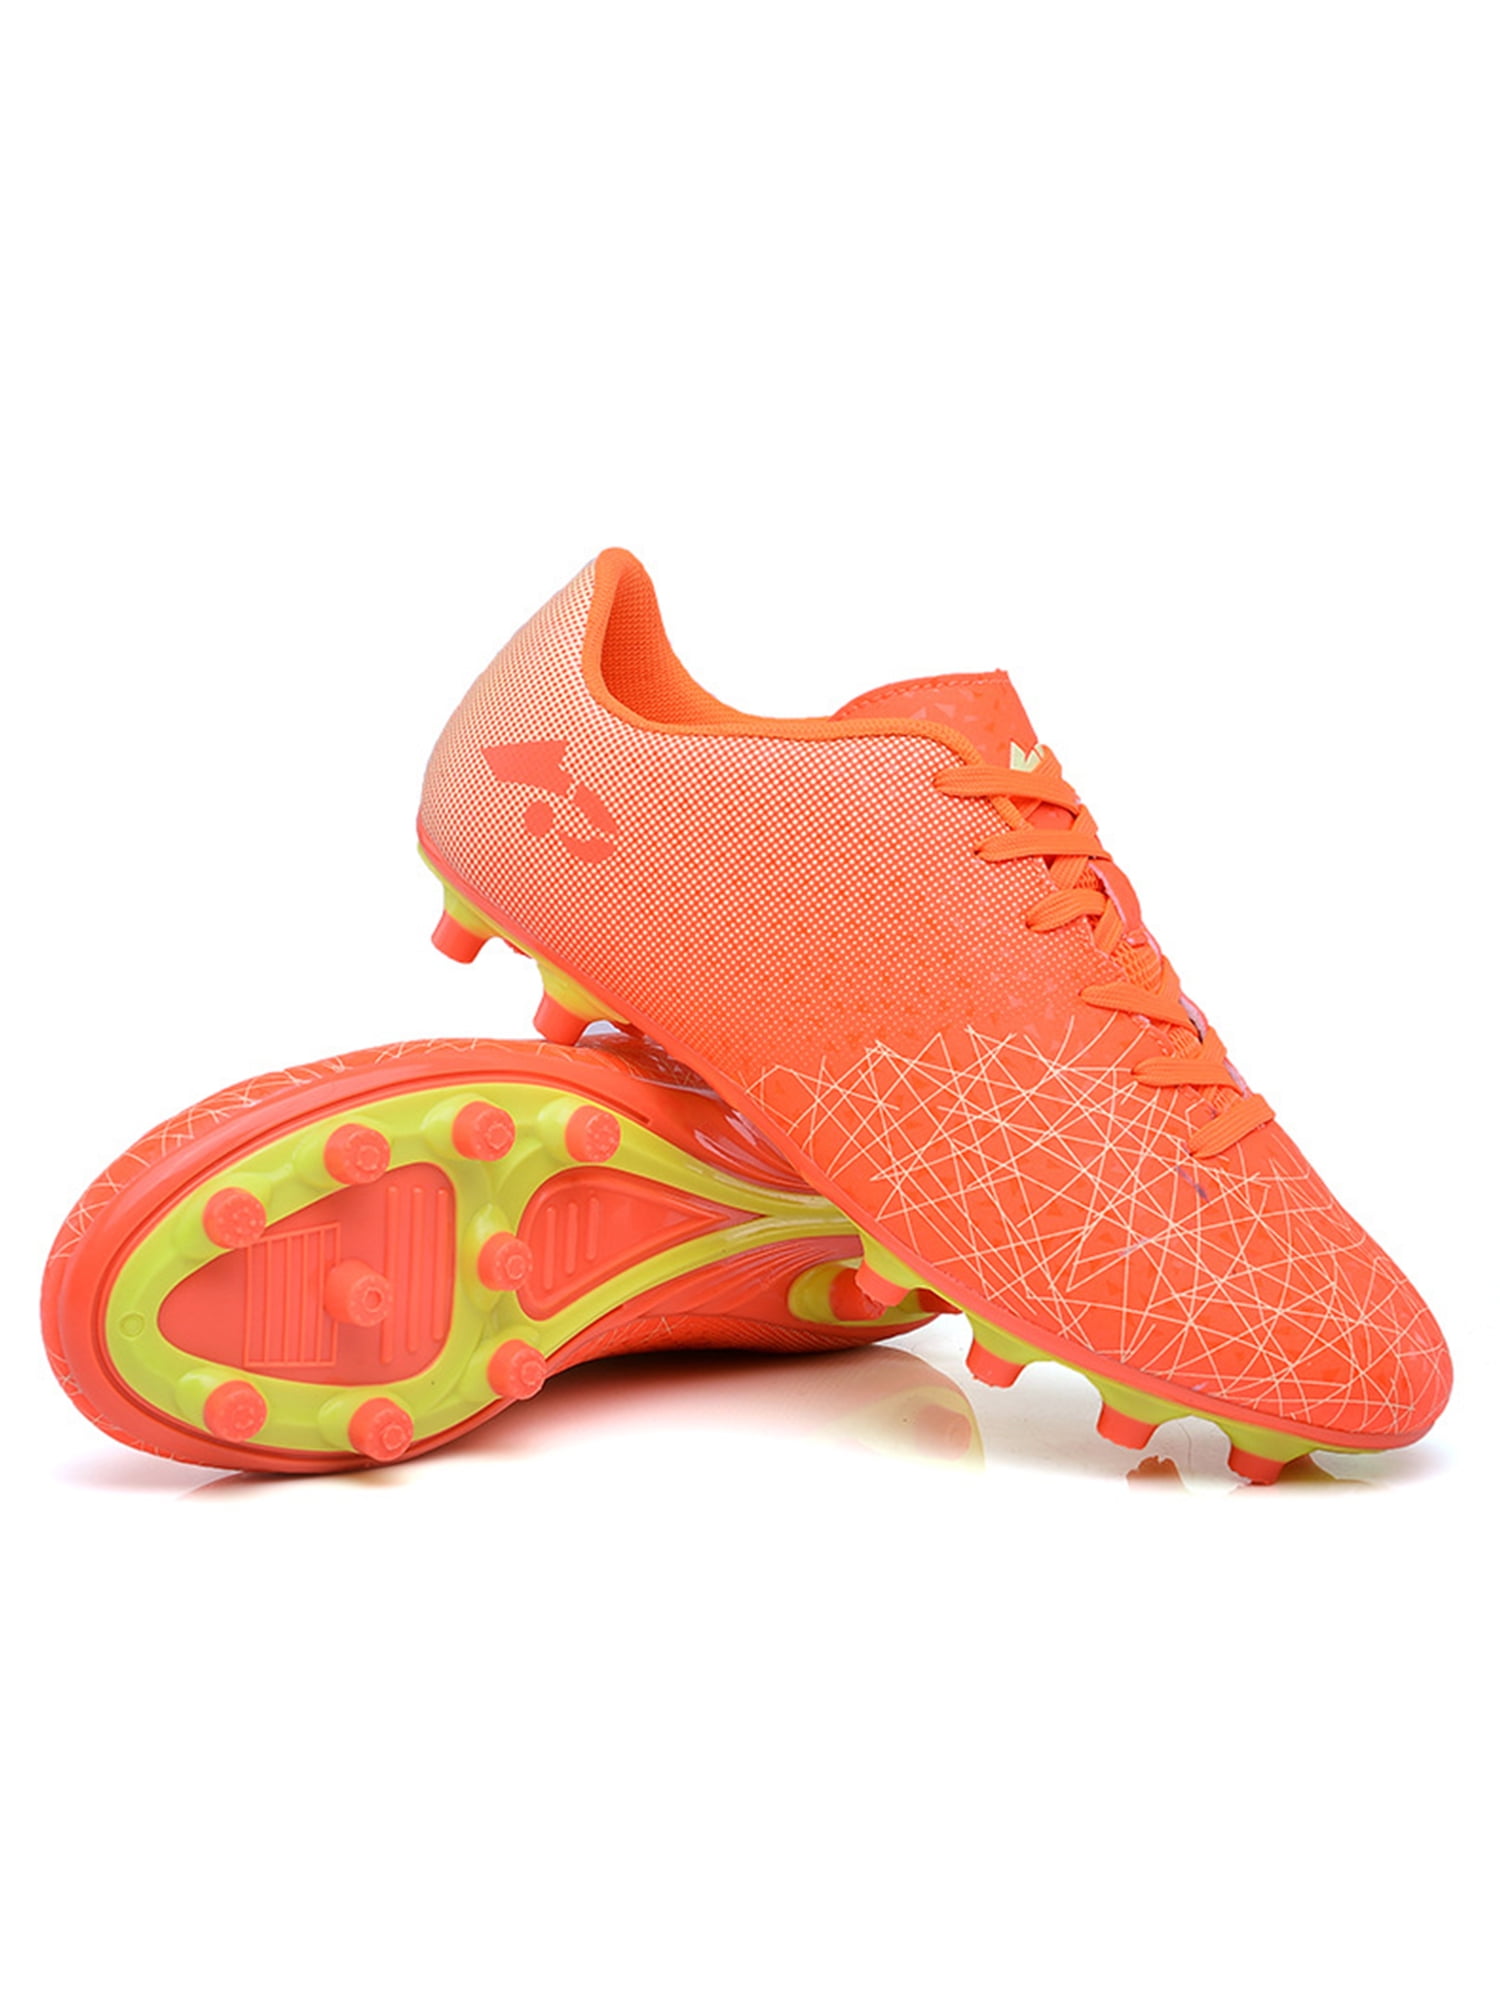 Breathable Football Shoes for Boys Soccer Shoes Lace-Up Man Football Boots Teenager Trainers 